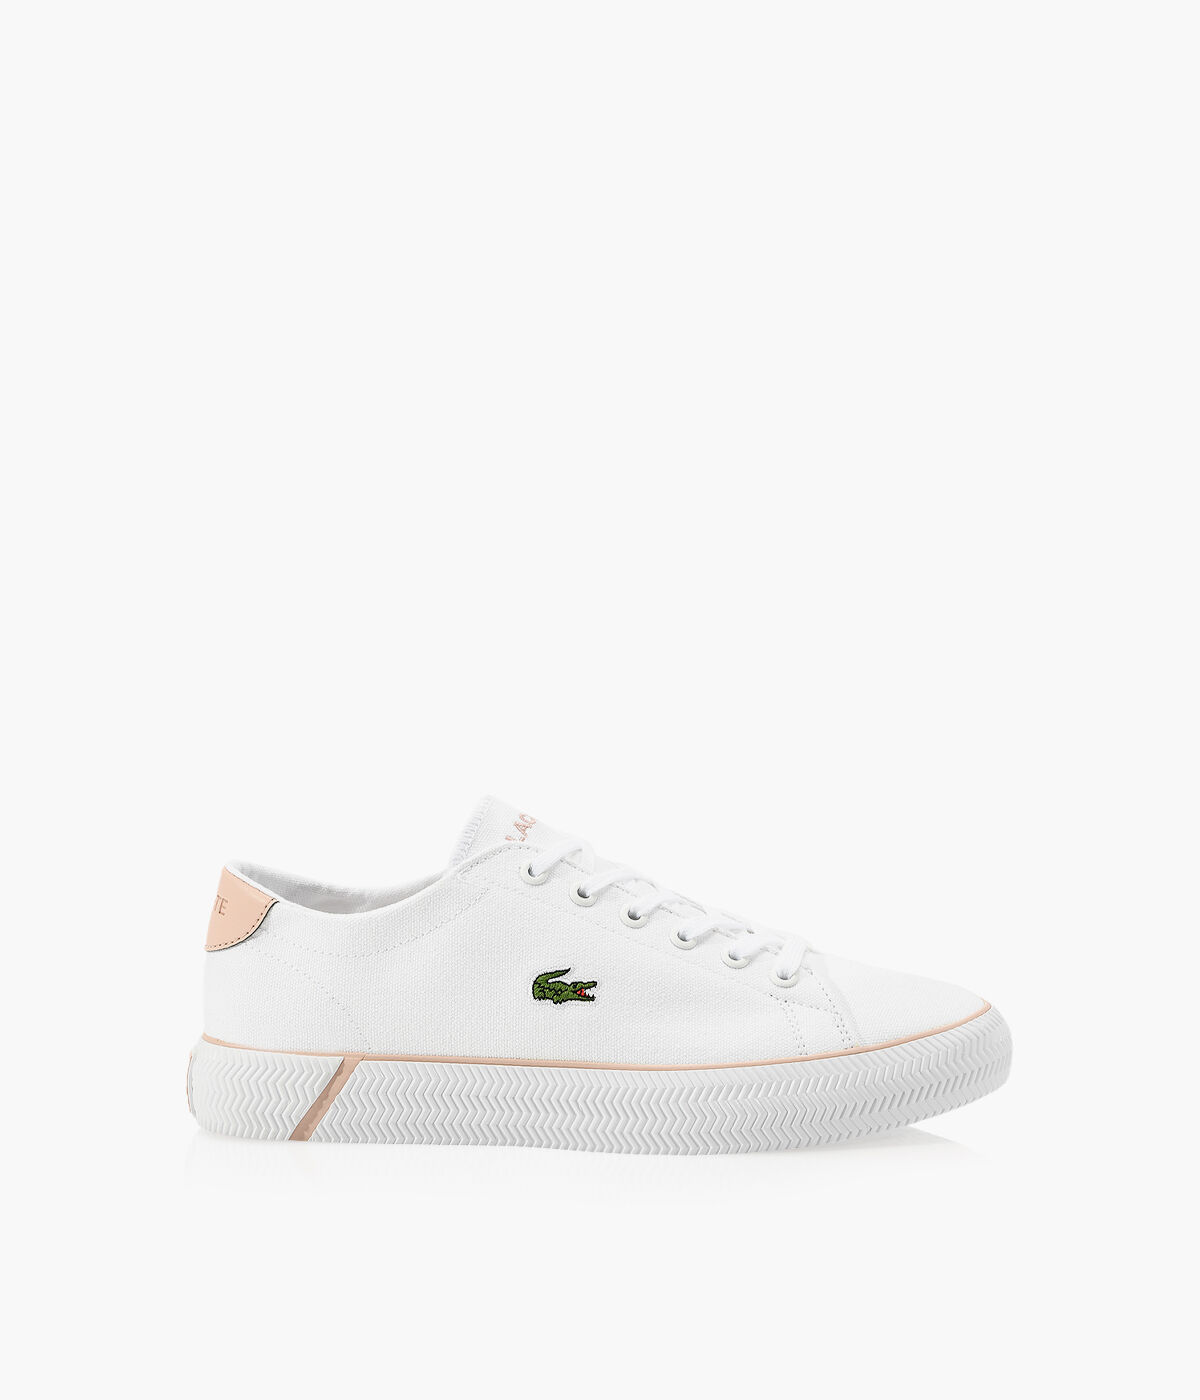 Buy > lacoste brown shoes > in stock